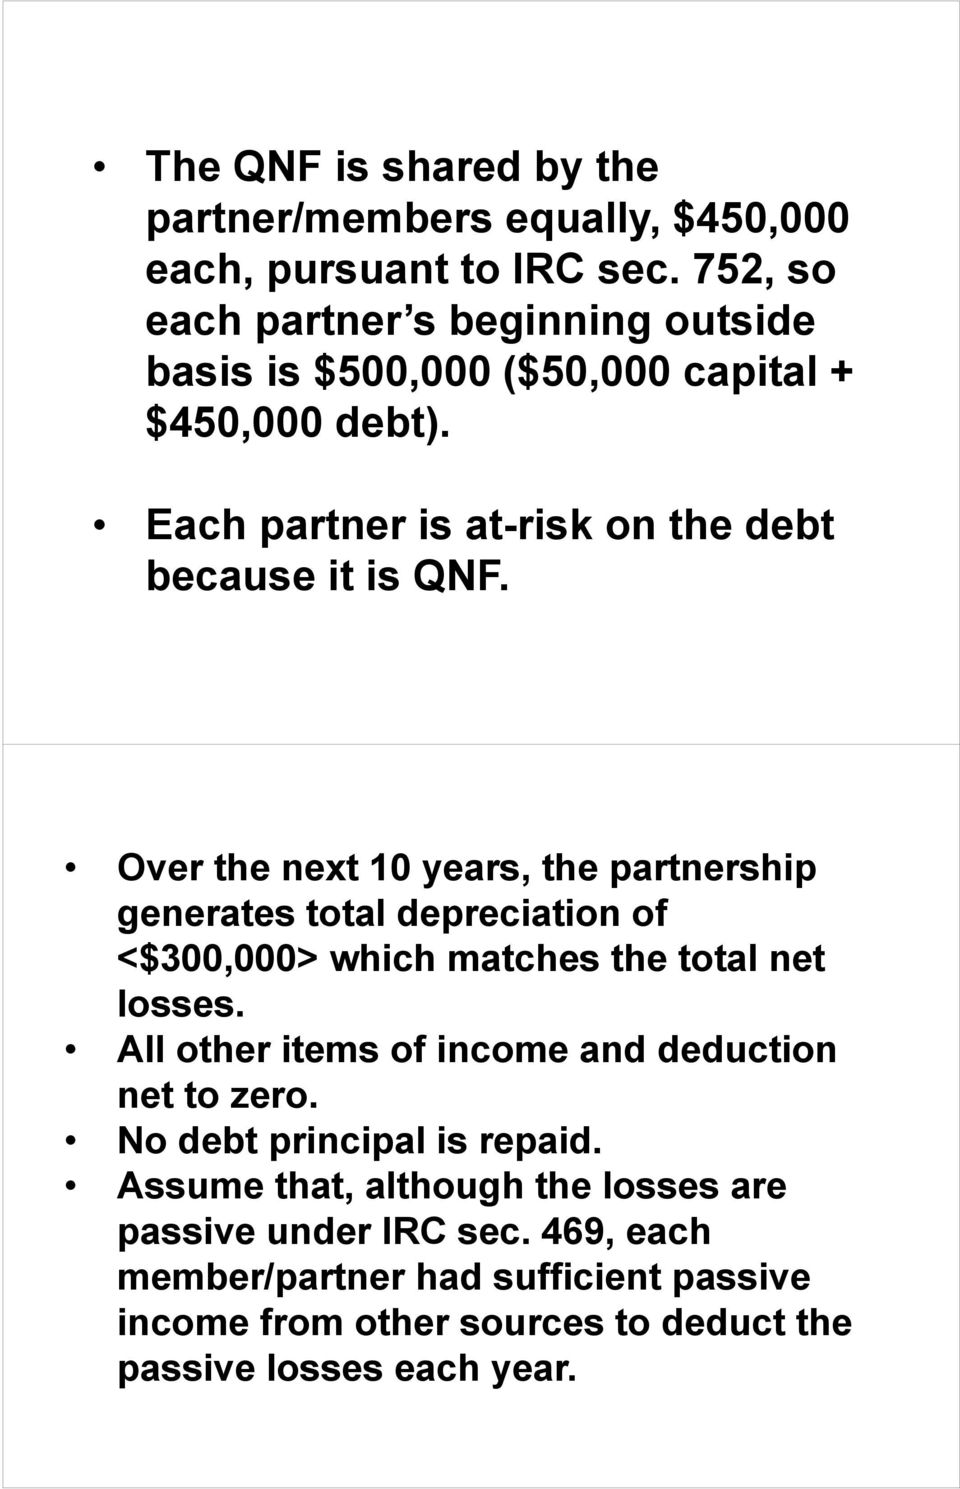 Over the next 10 years, the partnership generates total depreciation of <$300,000> which matches the total net losses.